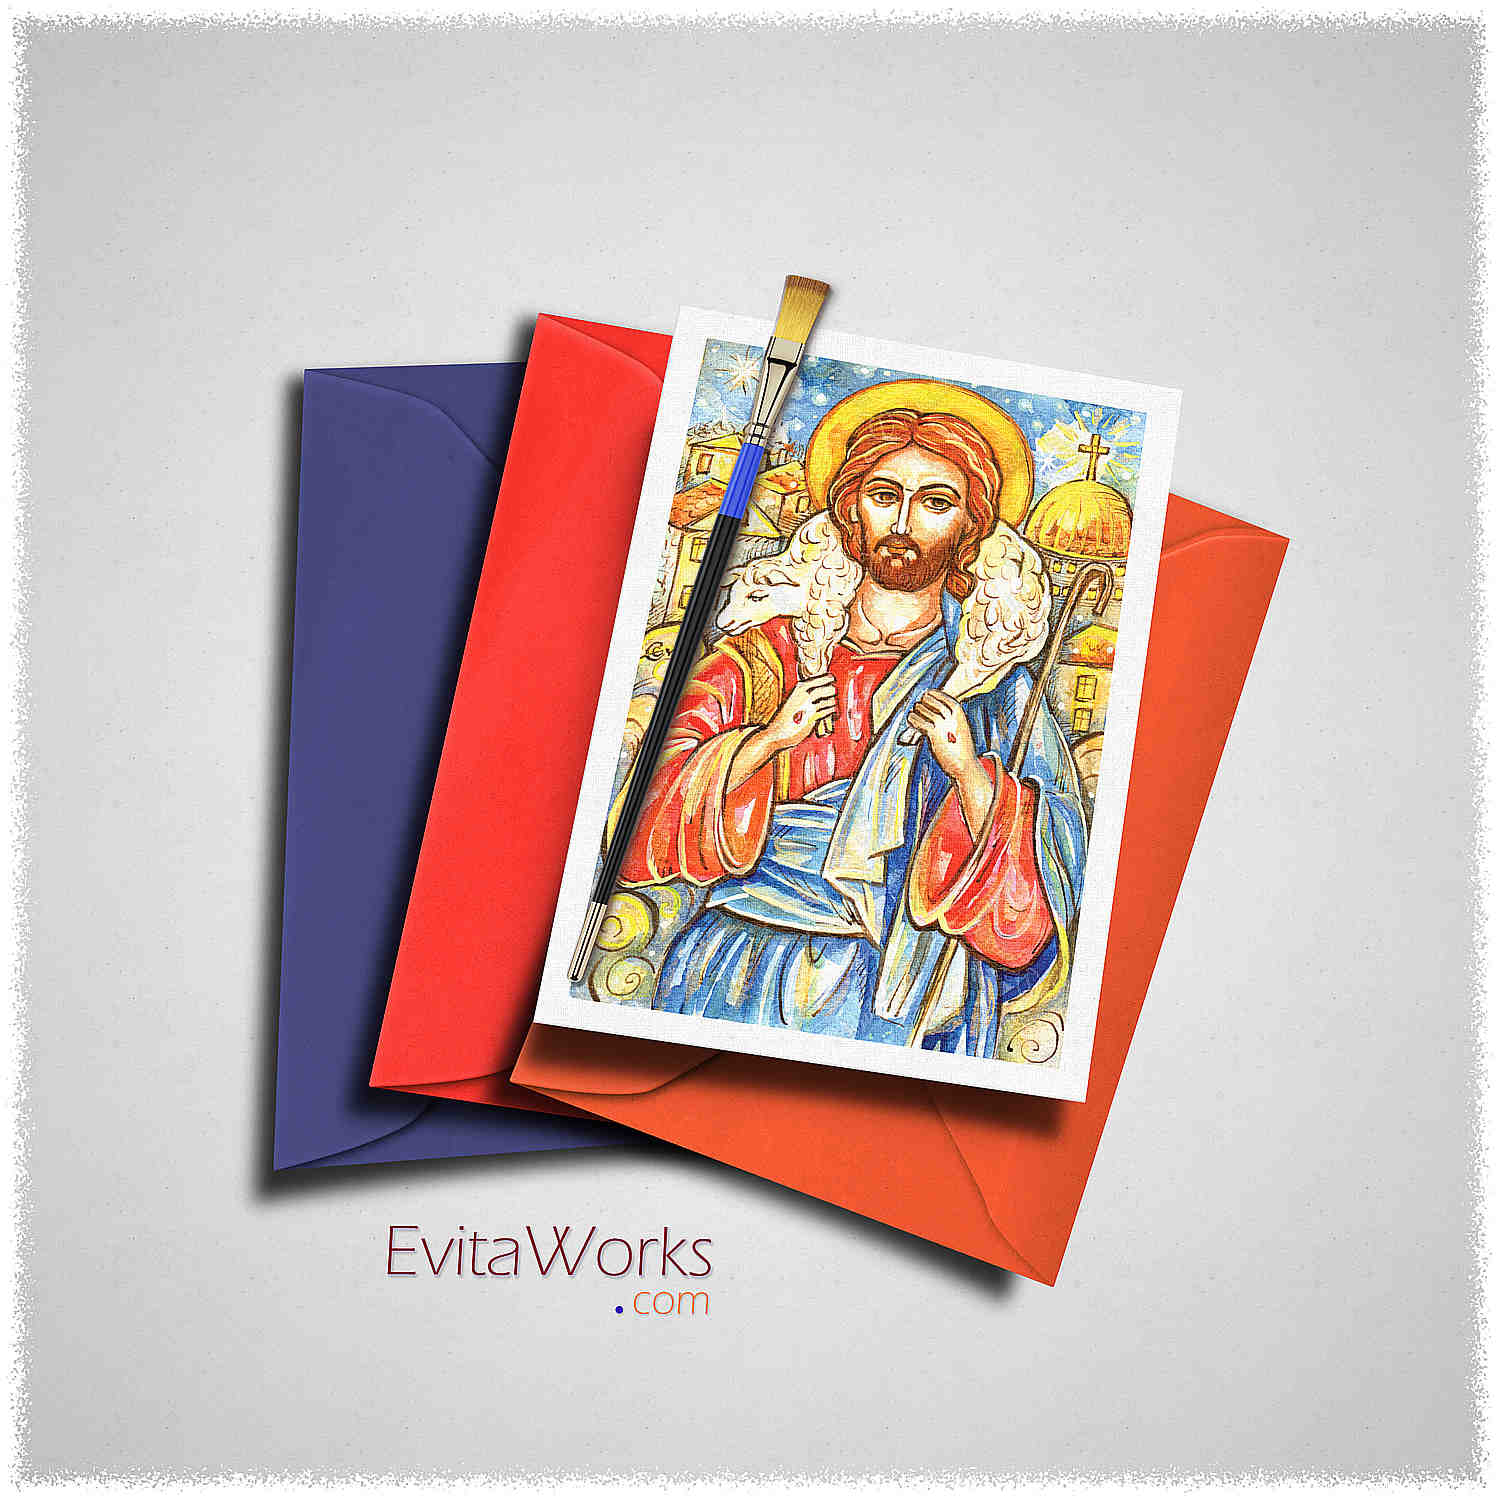 Hit to learn about "Christ 01, Christmas art" on cards